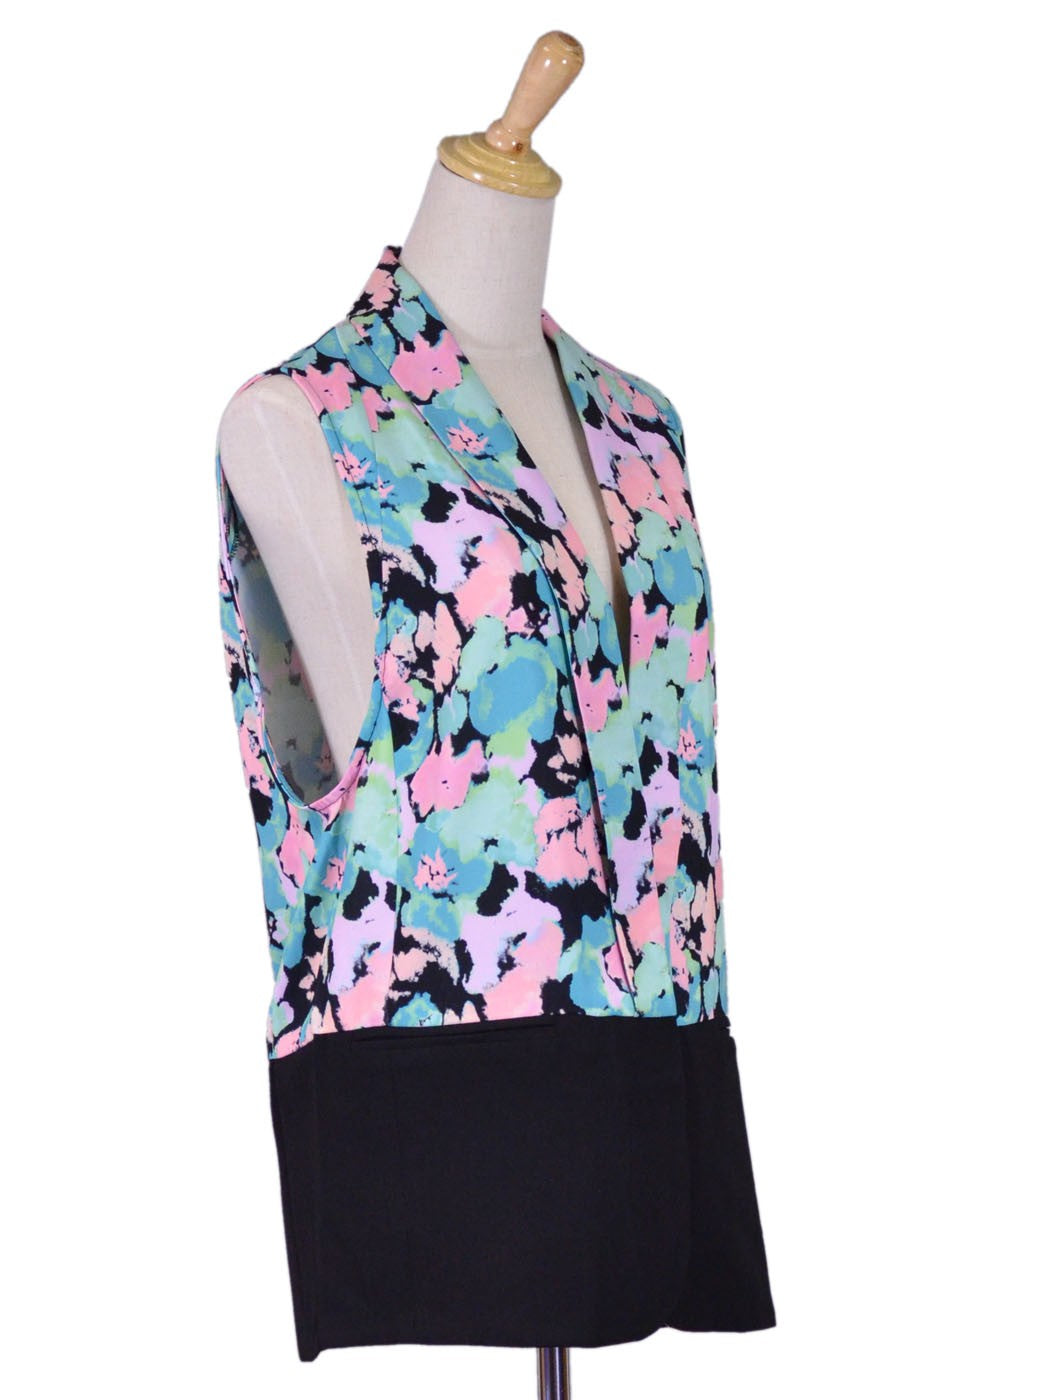 Gentle Fawn Brand Rochester Mint Watercolor Abstract Floral Art Vest with Lapel - ALILANG.COM